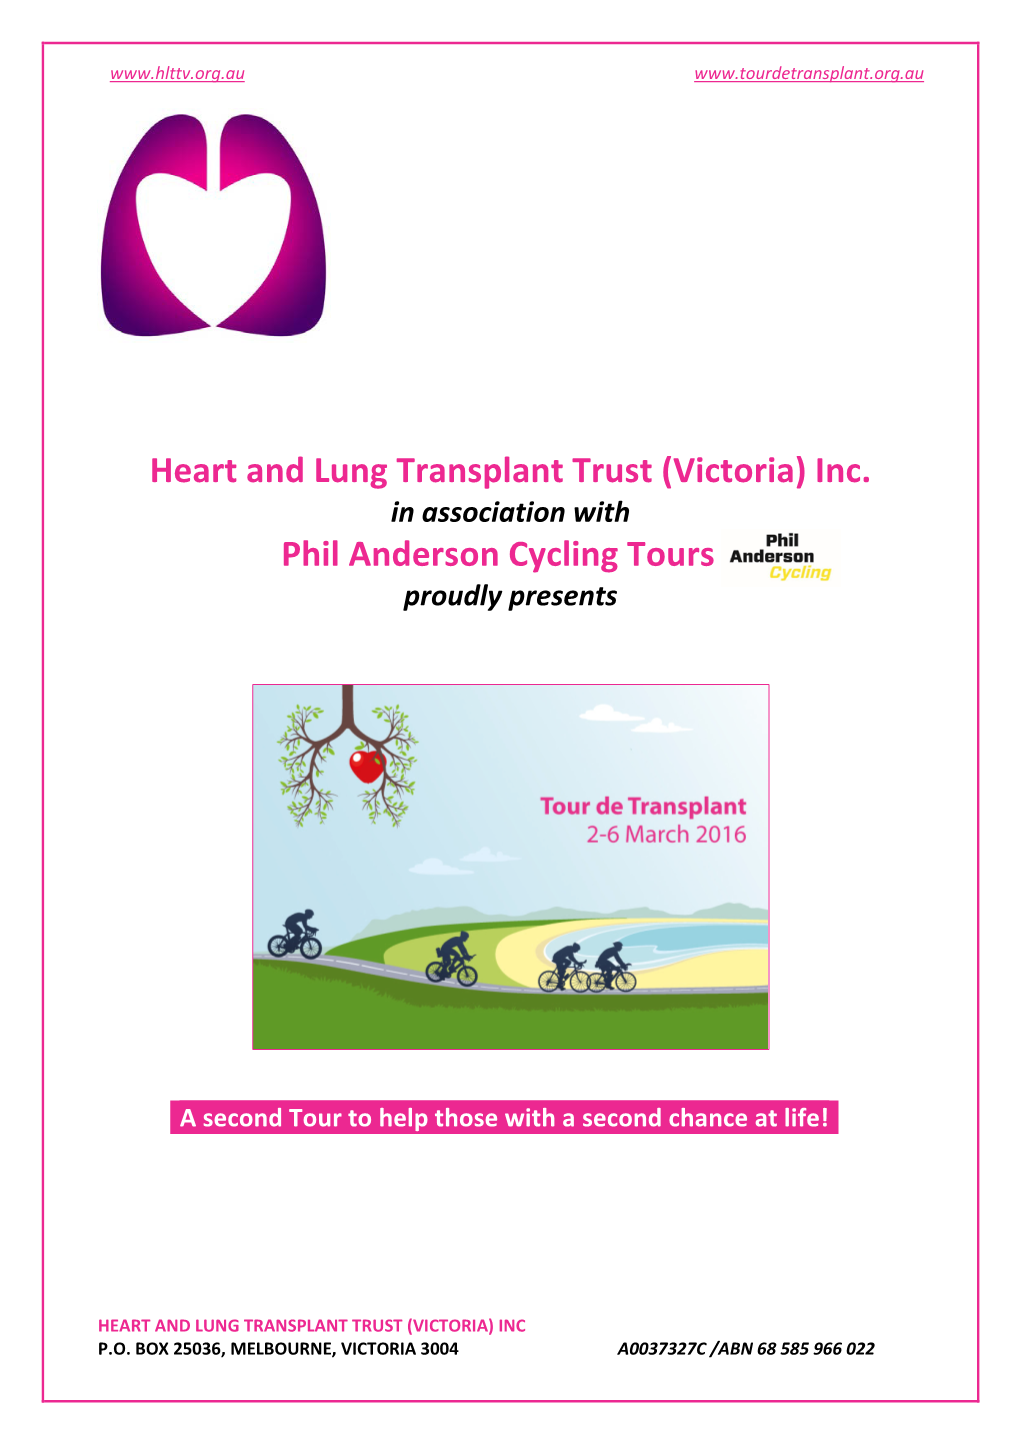 Heart and Lung Transplant Trust (Victoria) Inc. Phil Anderson Cycling